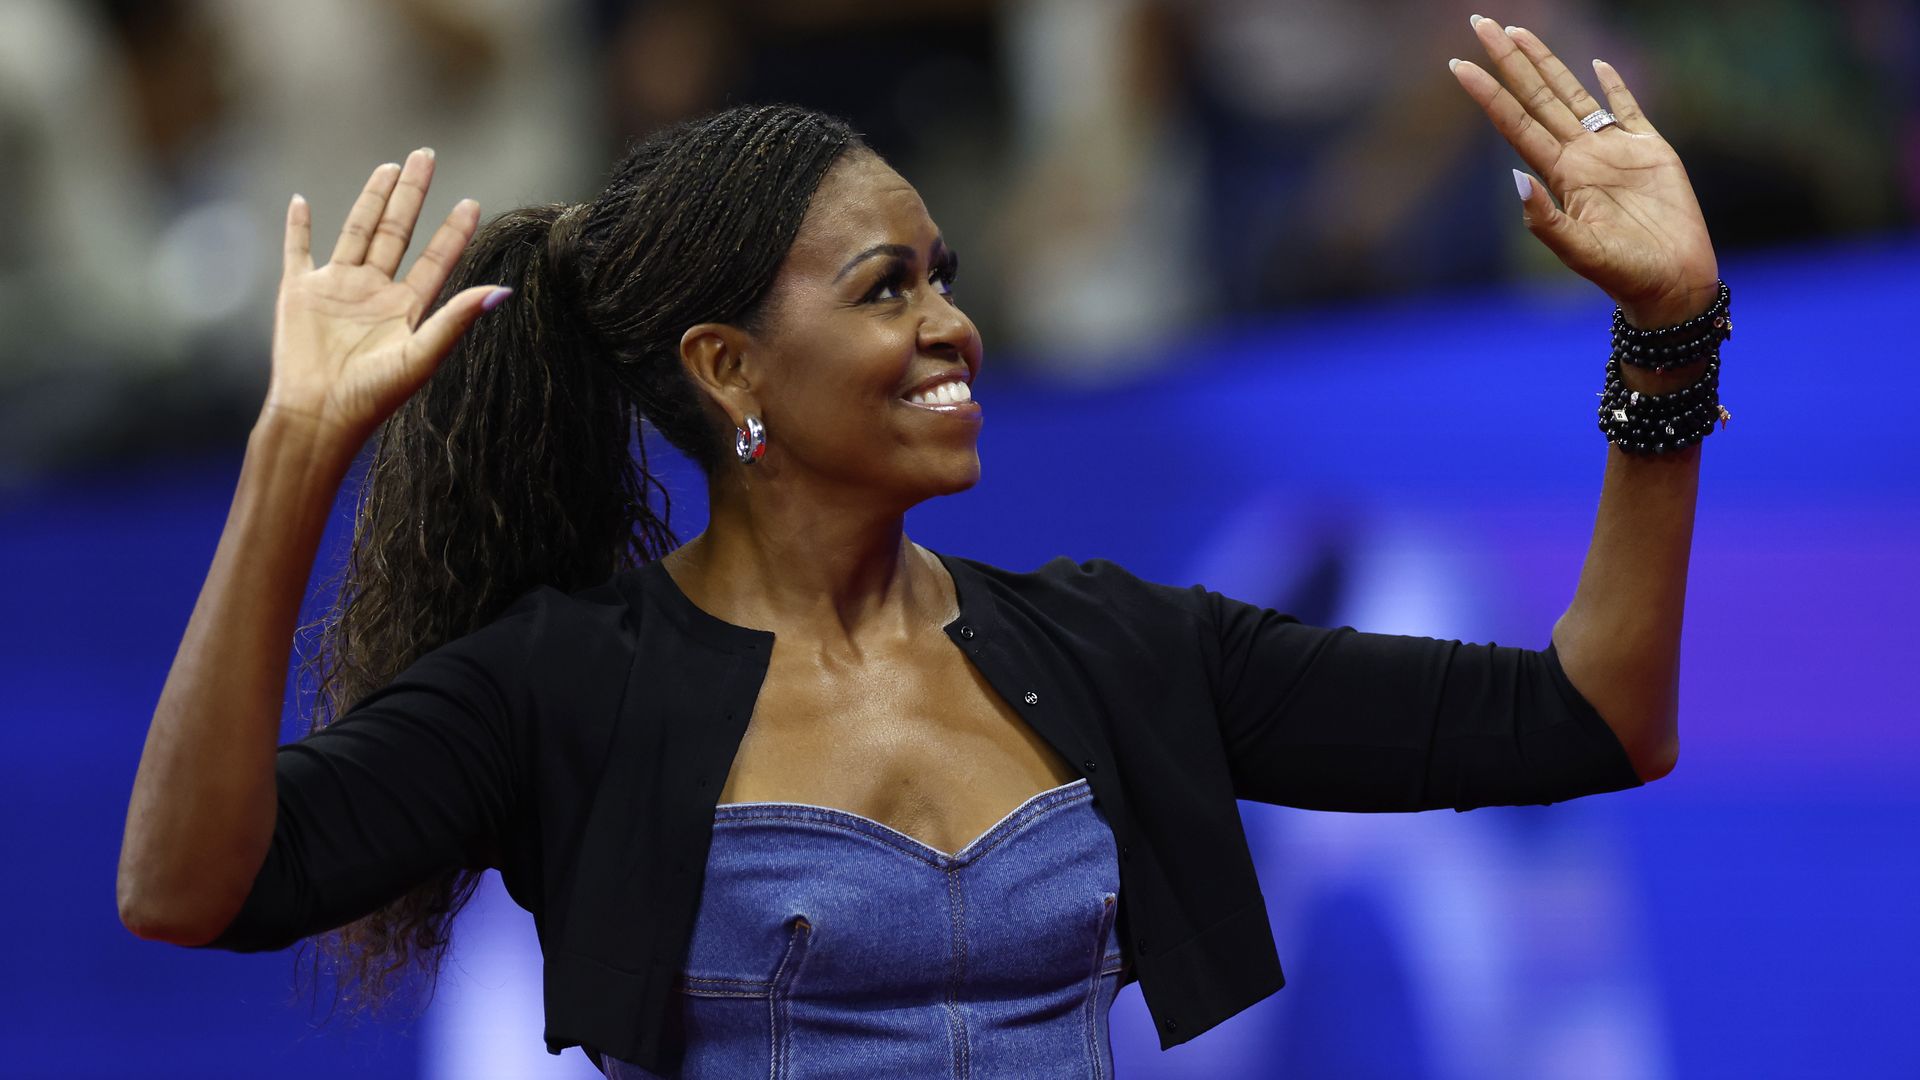 Former first lady of the United States Michelle Obama waves with both hands during a ceremony honoring 50 years of equal pay at the U.S Open at the USTA Billie Jean King National Tennis Center on August 28, 2023 in Queens, New York City.